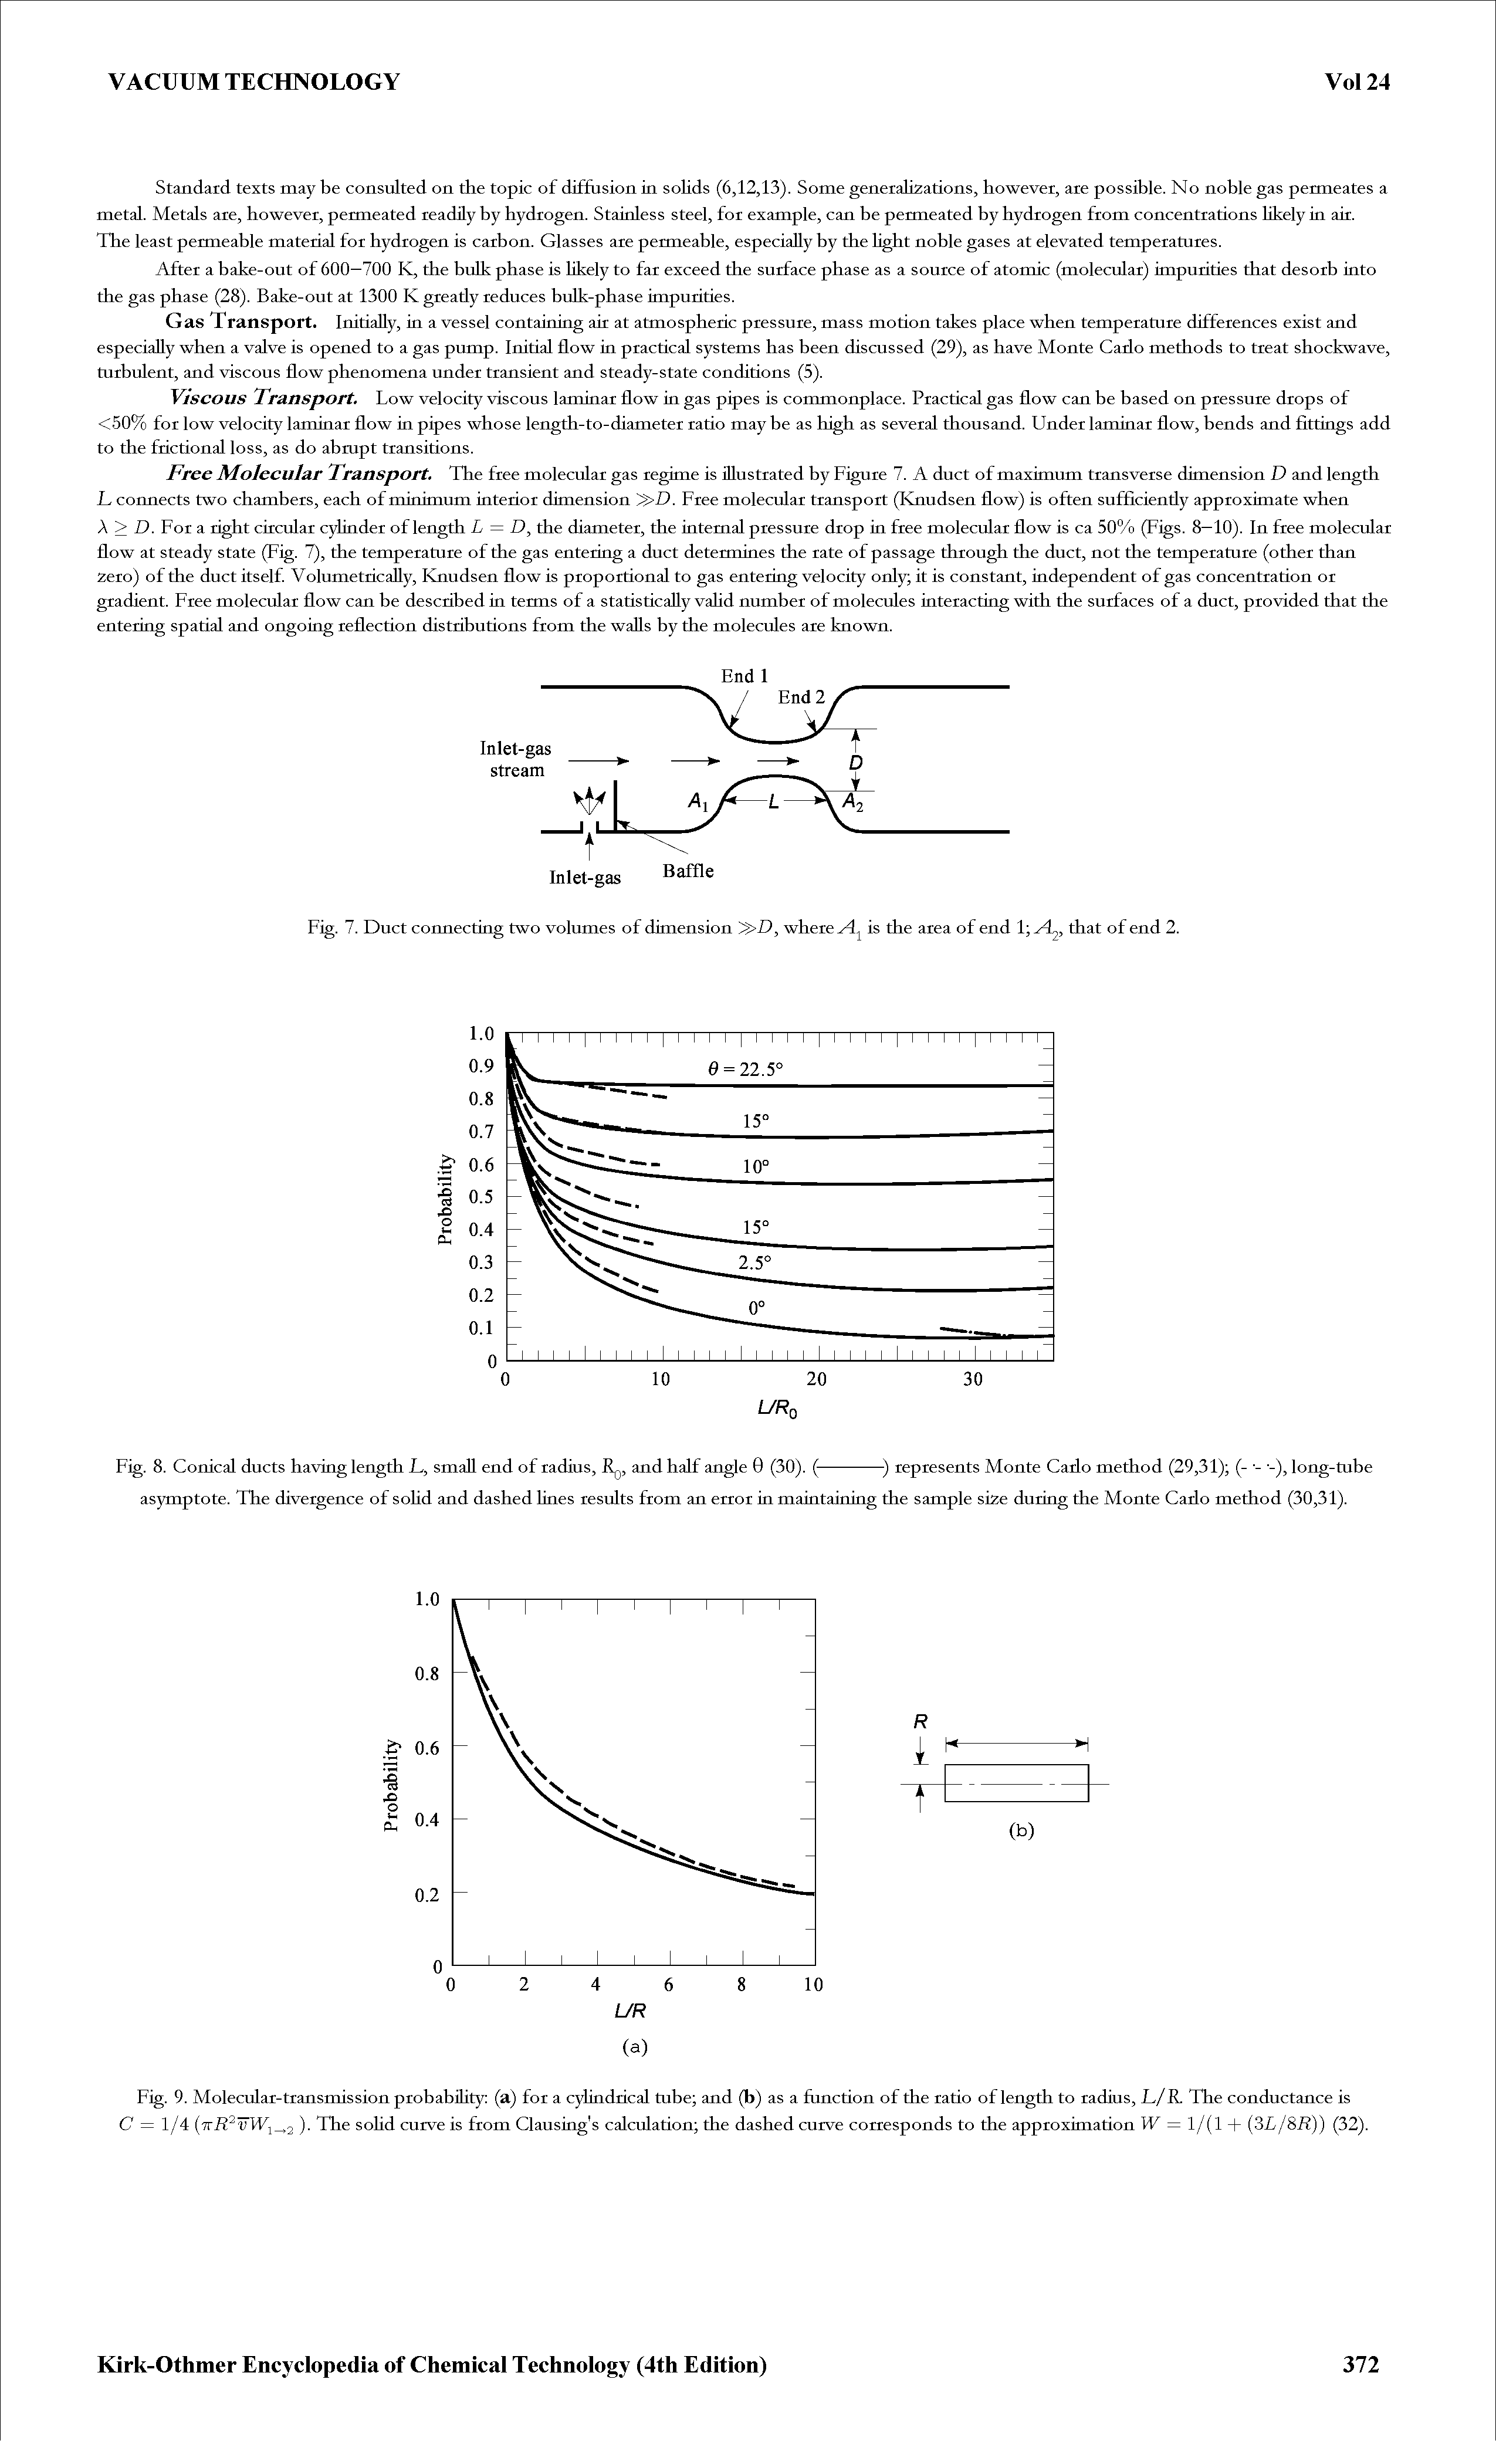 Fig. 9. Moleculai-tiansmission probability (a) for a cylindiical tube and (b) as a function of the ratio of length to radius, L/R. The conductance is C = 1/4 (7tR W 2 ) The solid curve is from Clausing s calculation the dashed curve corresponds to the approximation W = 1/(1 + 3L/8R)) (32).